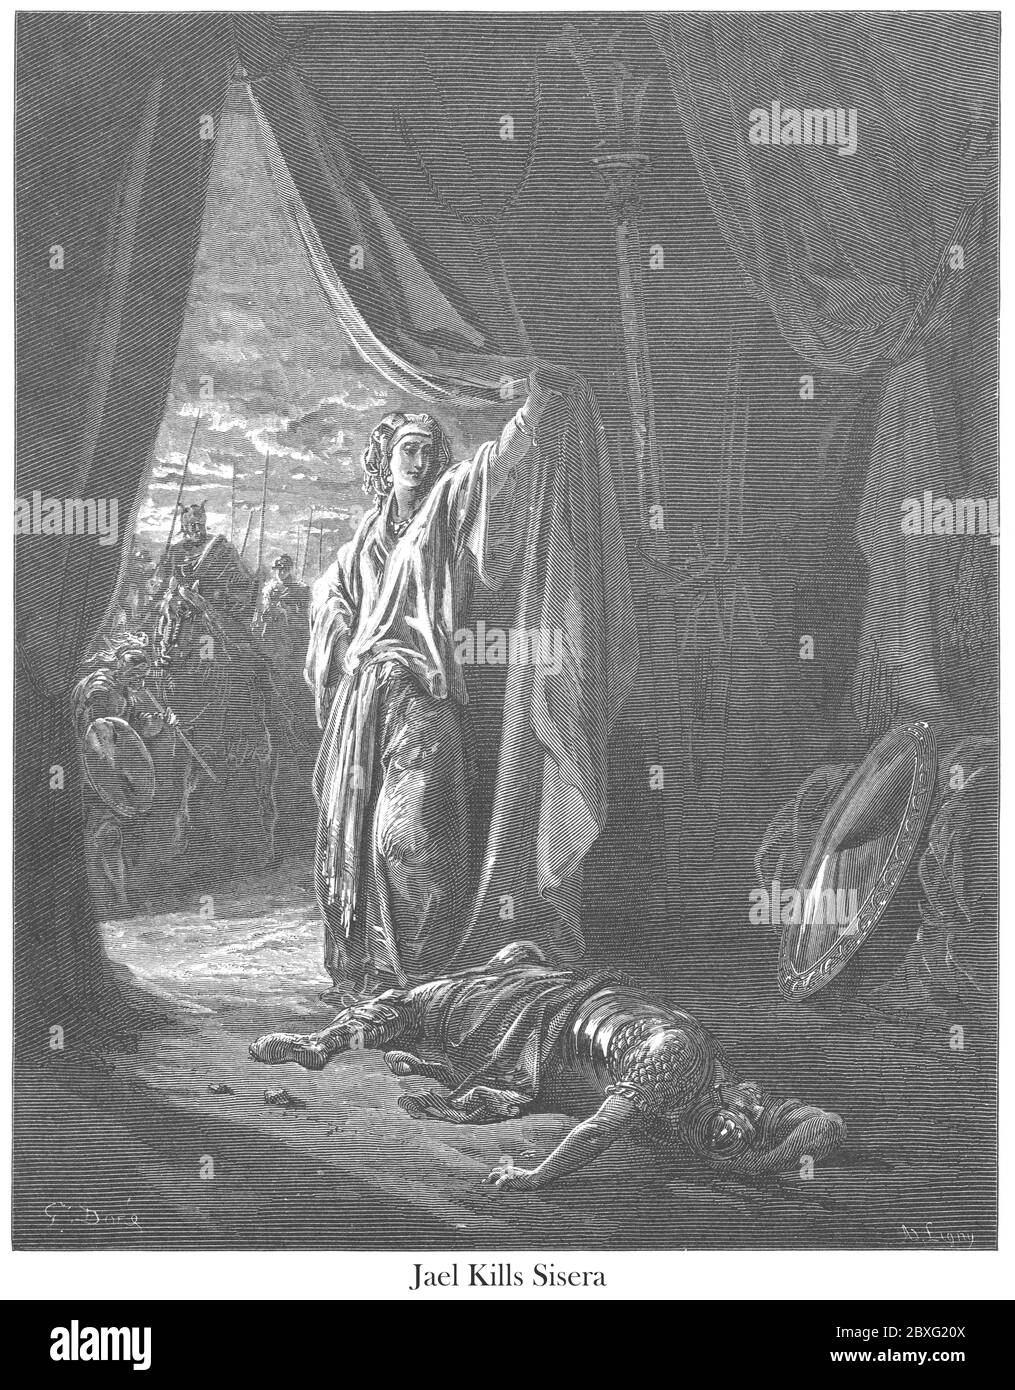 Jael [Yael] Kills Sisera Judges 4:21 From the book 'Bible Gallery' Illustrated by Gustave Dore with Memoir of Dore and Descriptive Letter-press by Talbot W. Chambers D.D. Published by Cassell & Company Limited in London and simultaneously by Mame in Tours, France in 1866 Stock Photo